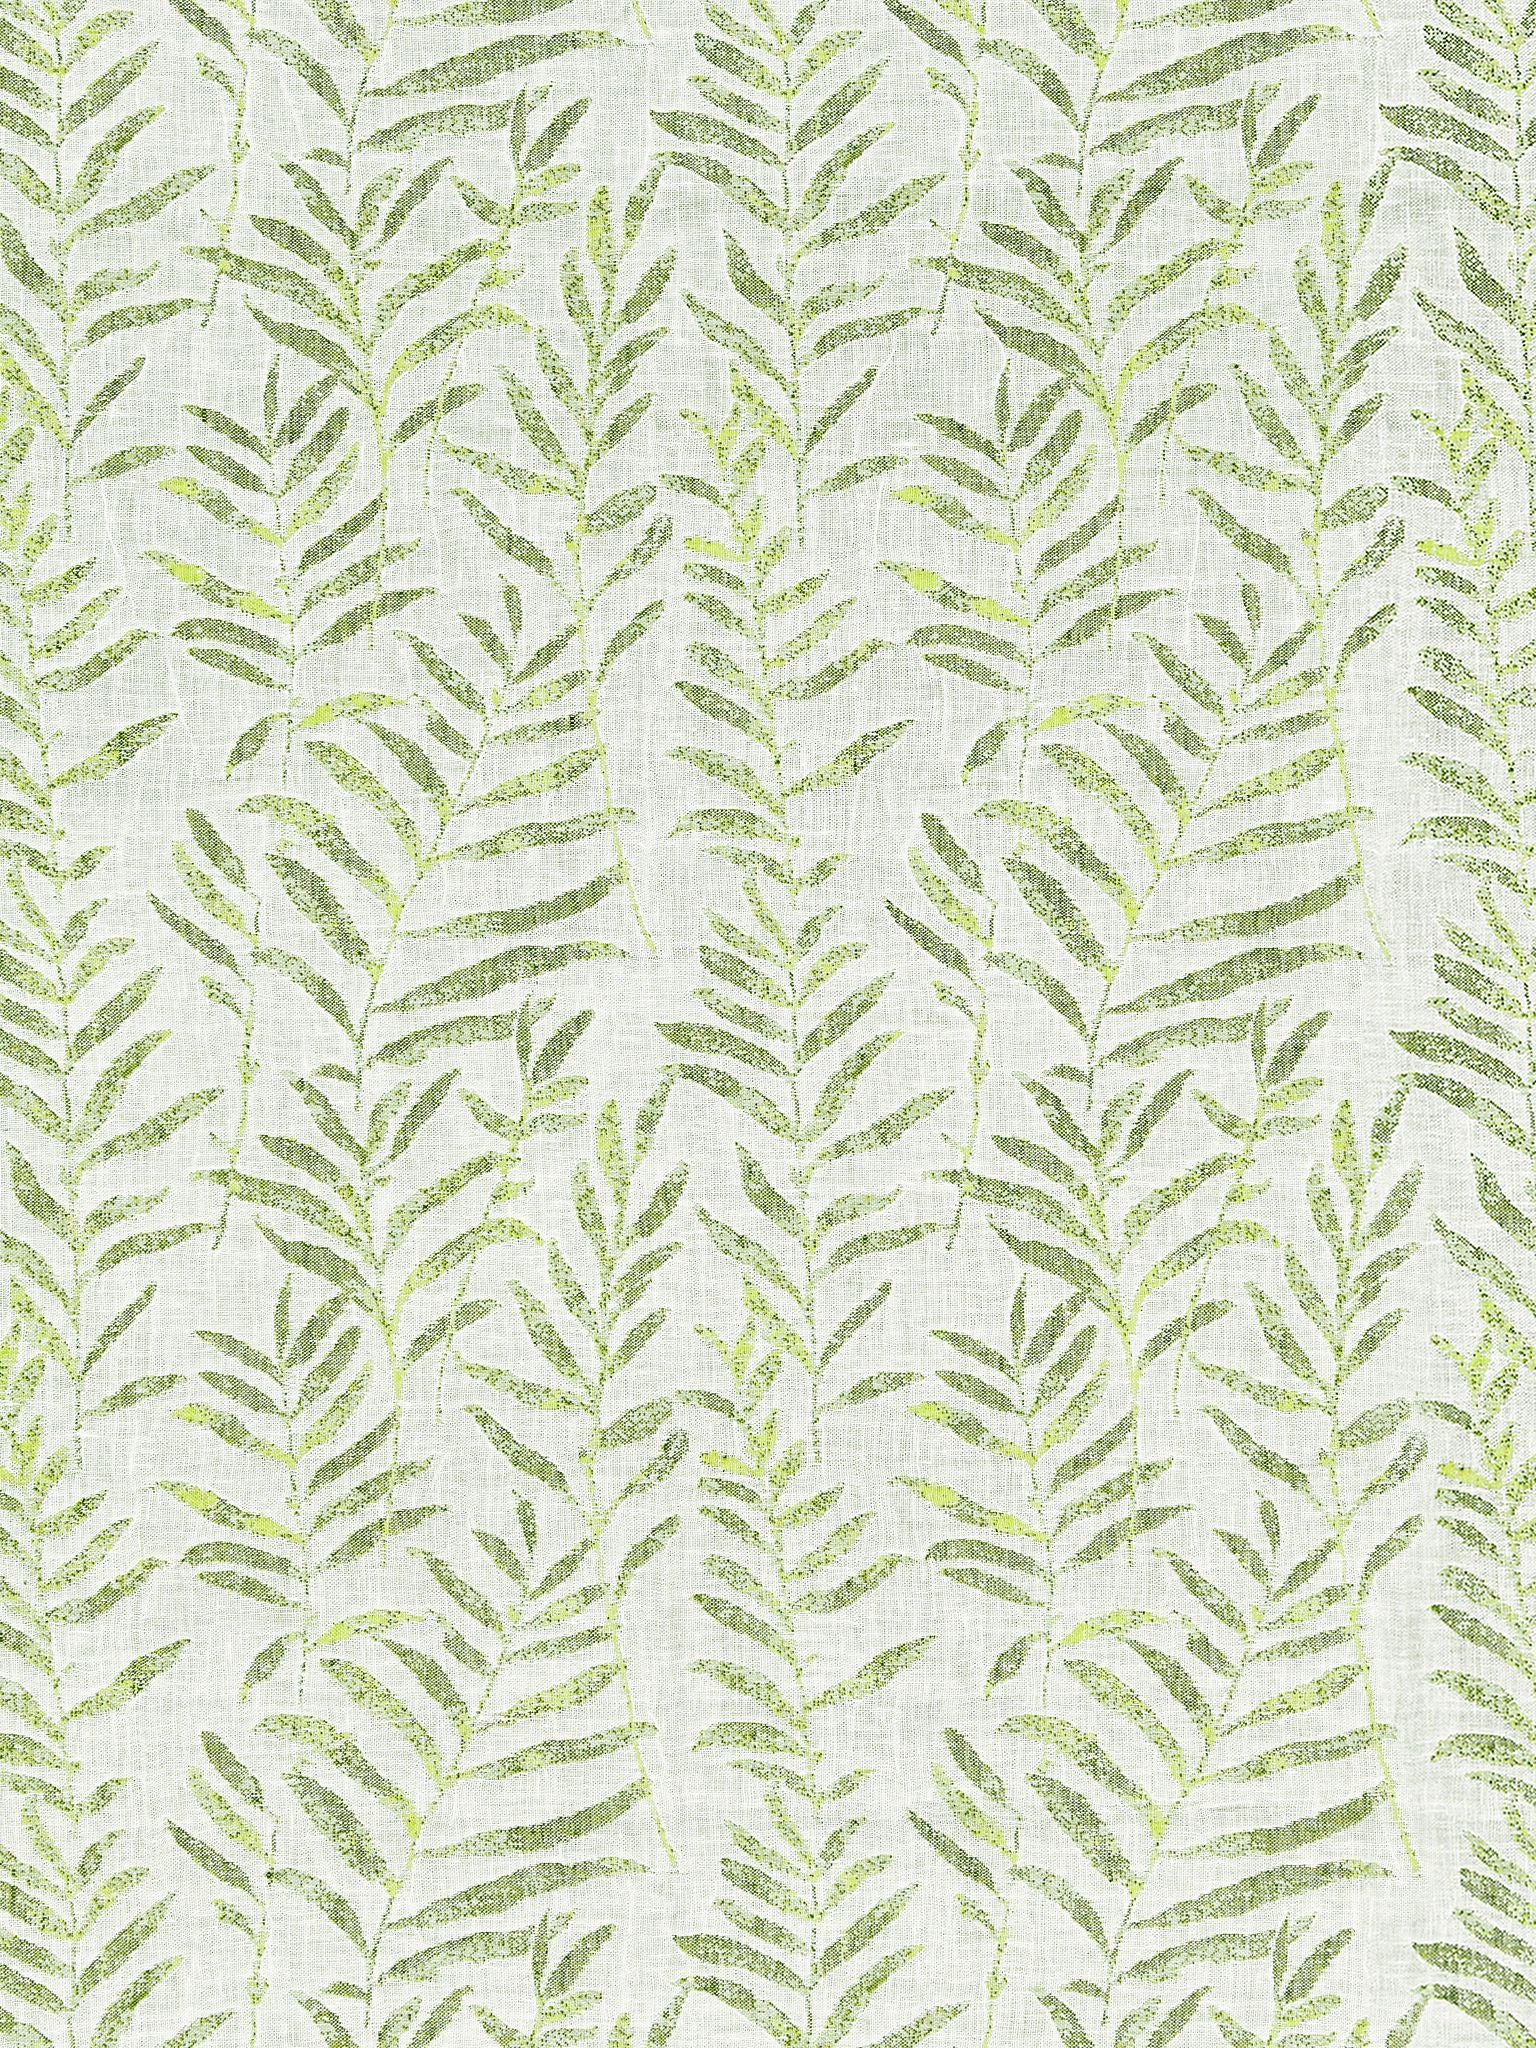 Willow Weave fabric in spring green color - pattern number GW 000227211 - by Scalamandre in the Grey Watkins collection